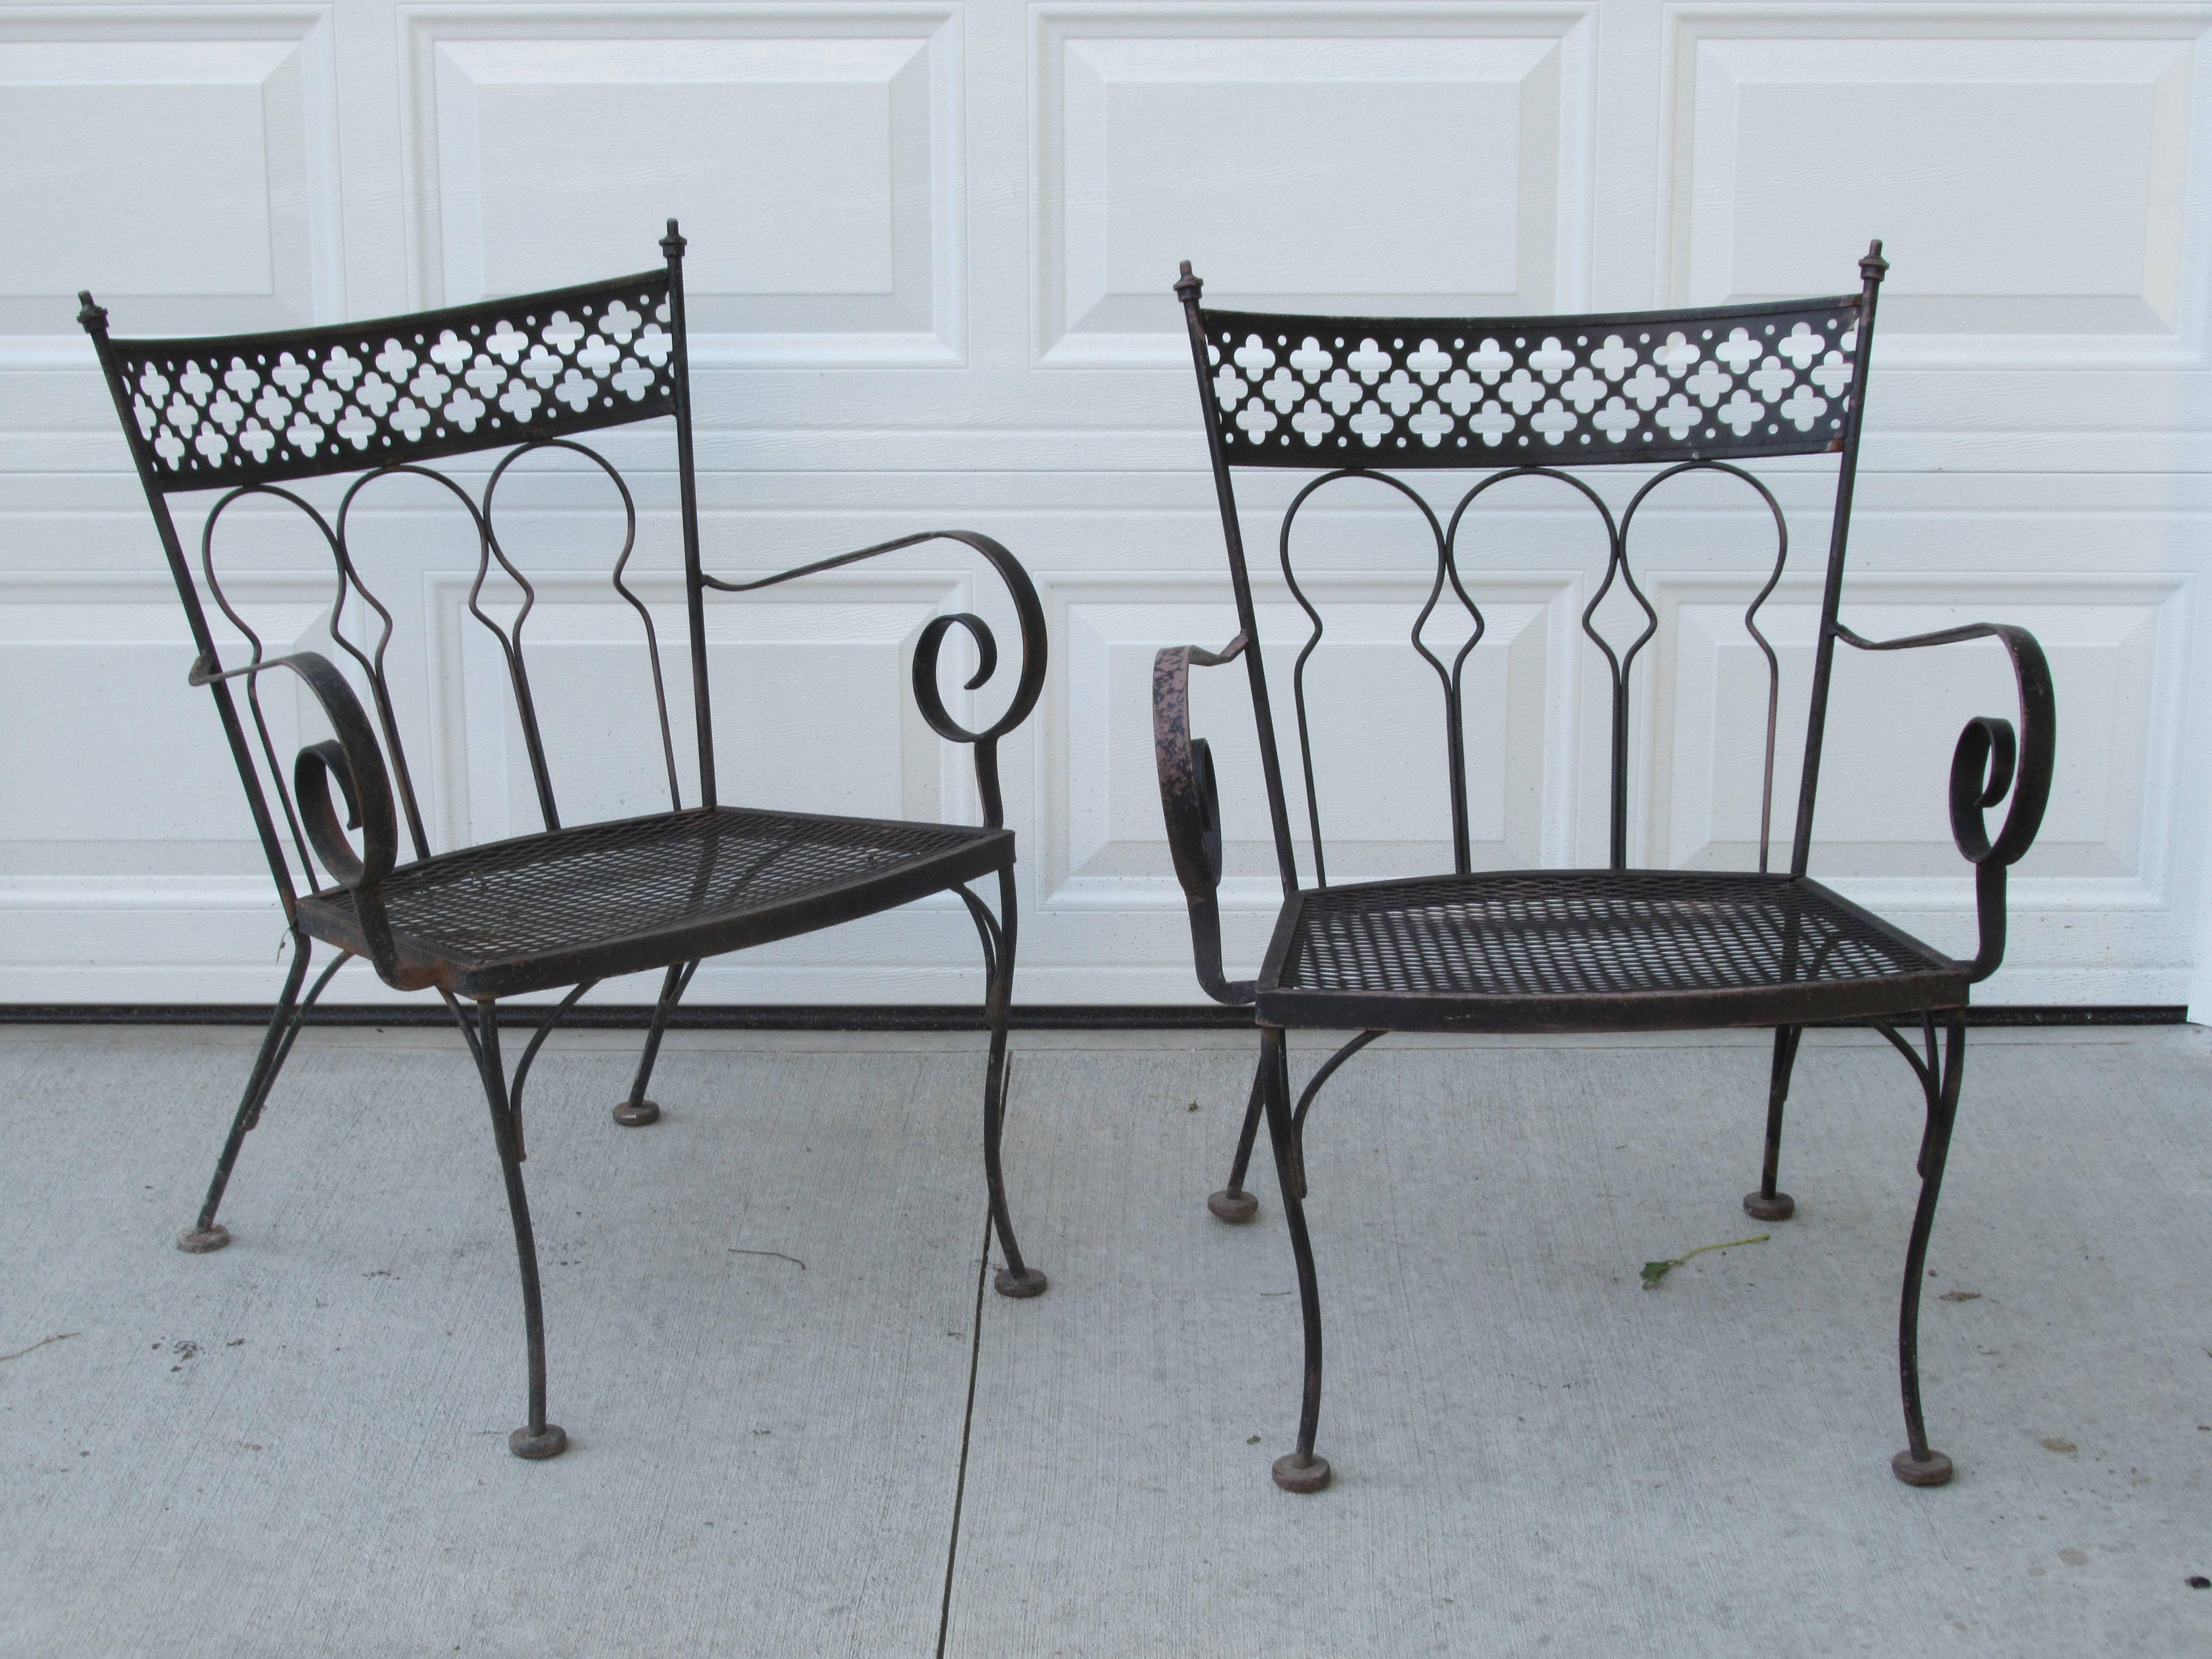 A great looking seven piece high style Gothic modernist wrought iron patio dining set consisting of four side chairs, two arm chairs and one rectangular table - all in nicely aged worn old black surface revealing underlying salmon color. Attributed